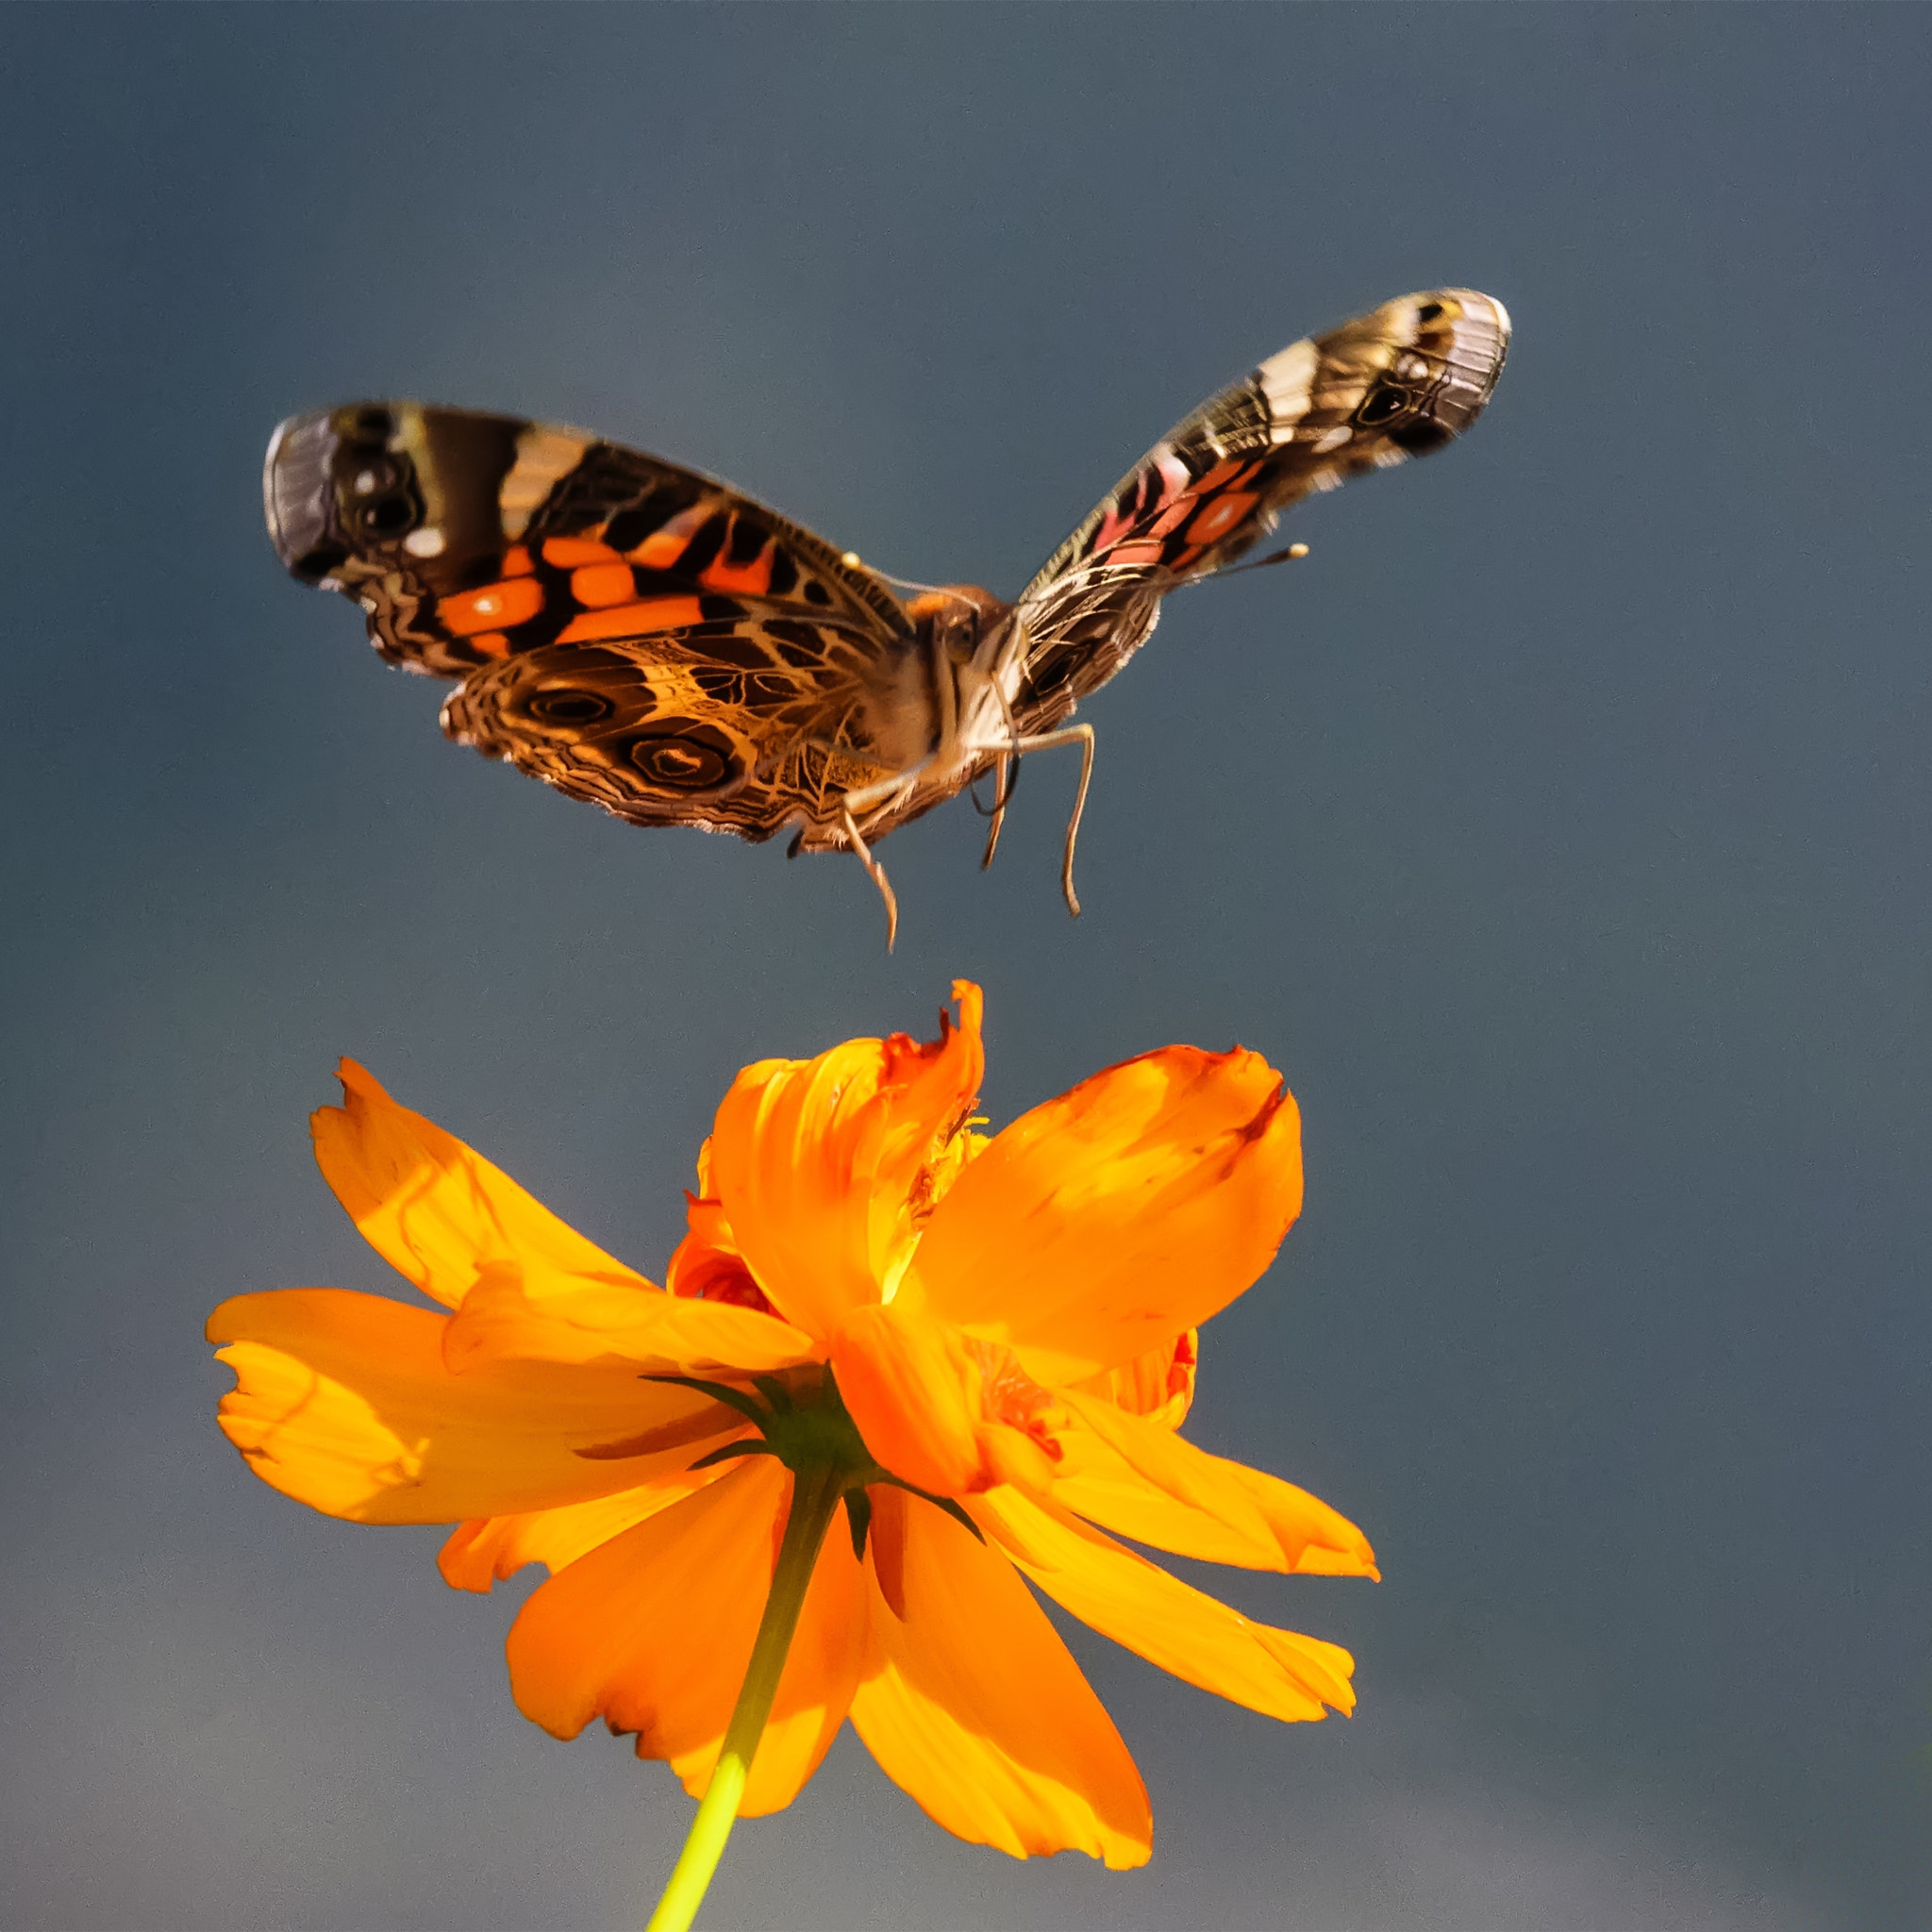 Nikon D750 sample photo. American lady butterfly lands on cosmos flower photography